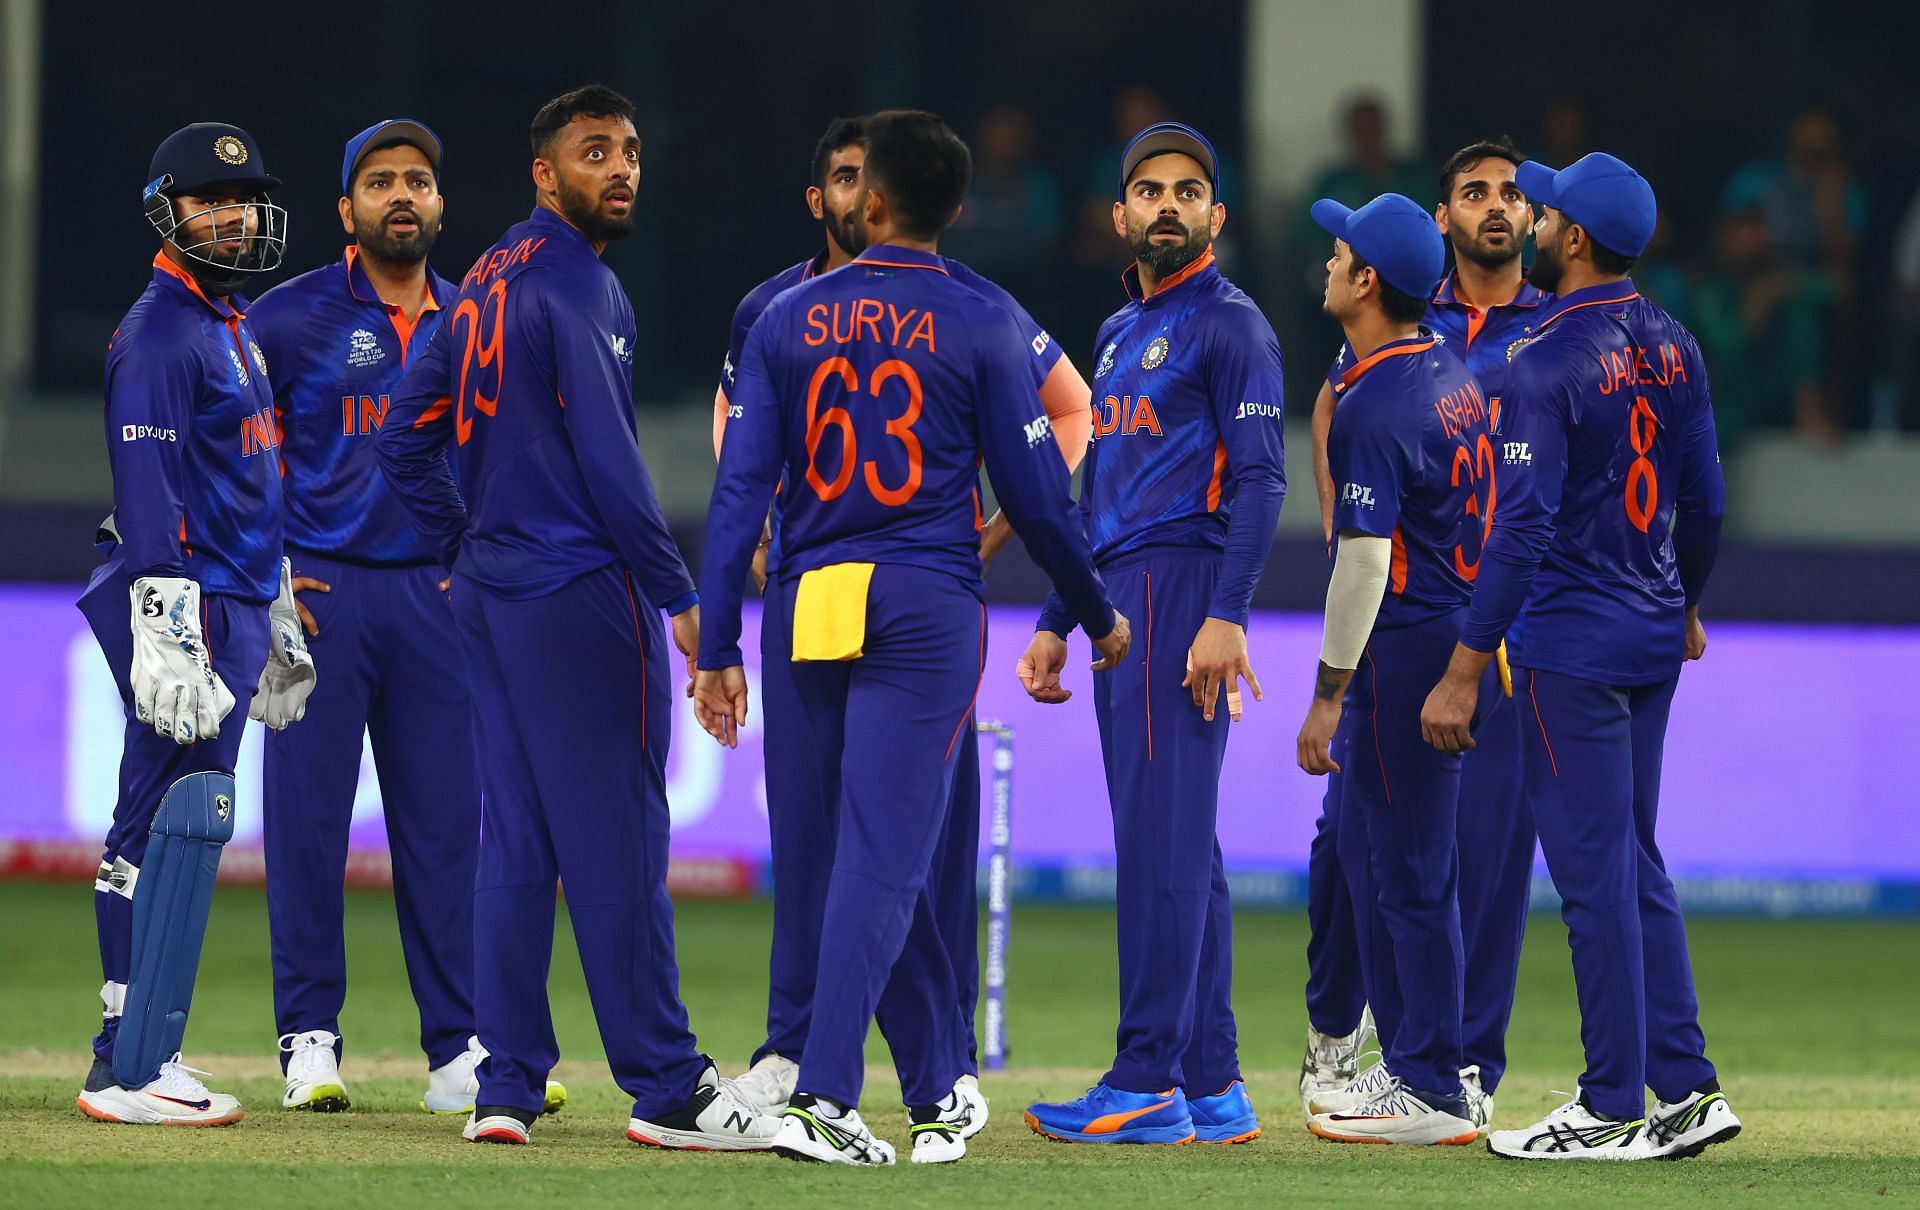 Indian team during the T20 World Cup 2021 clash against Pakistan. Pic: Getty Images